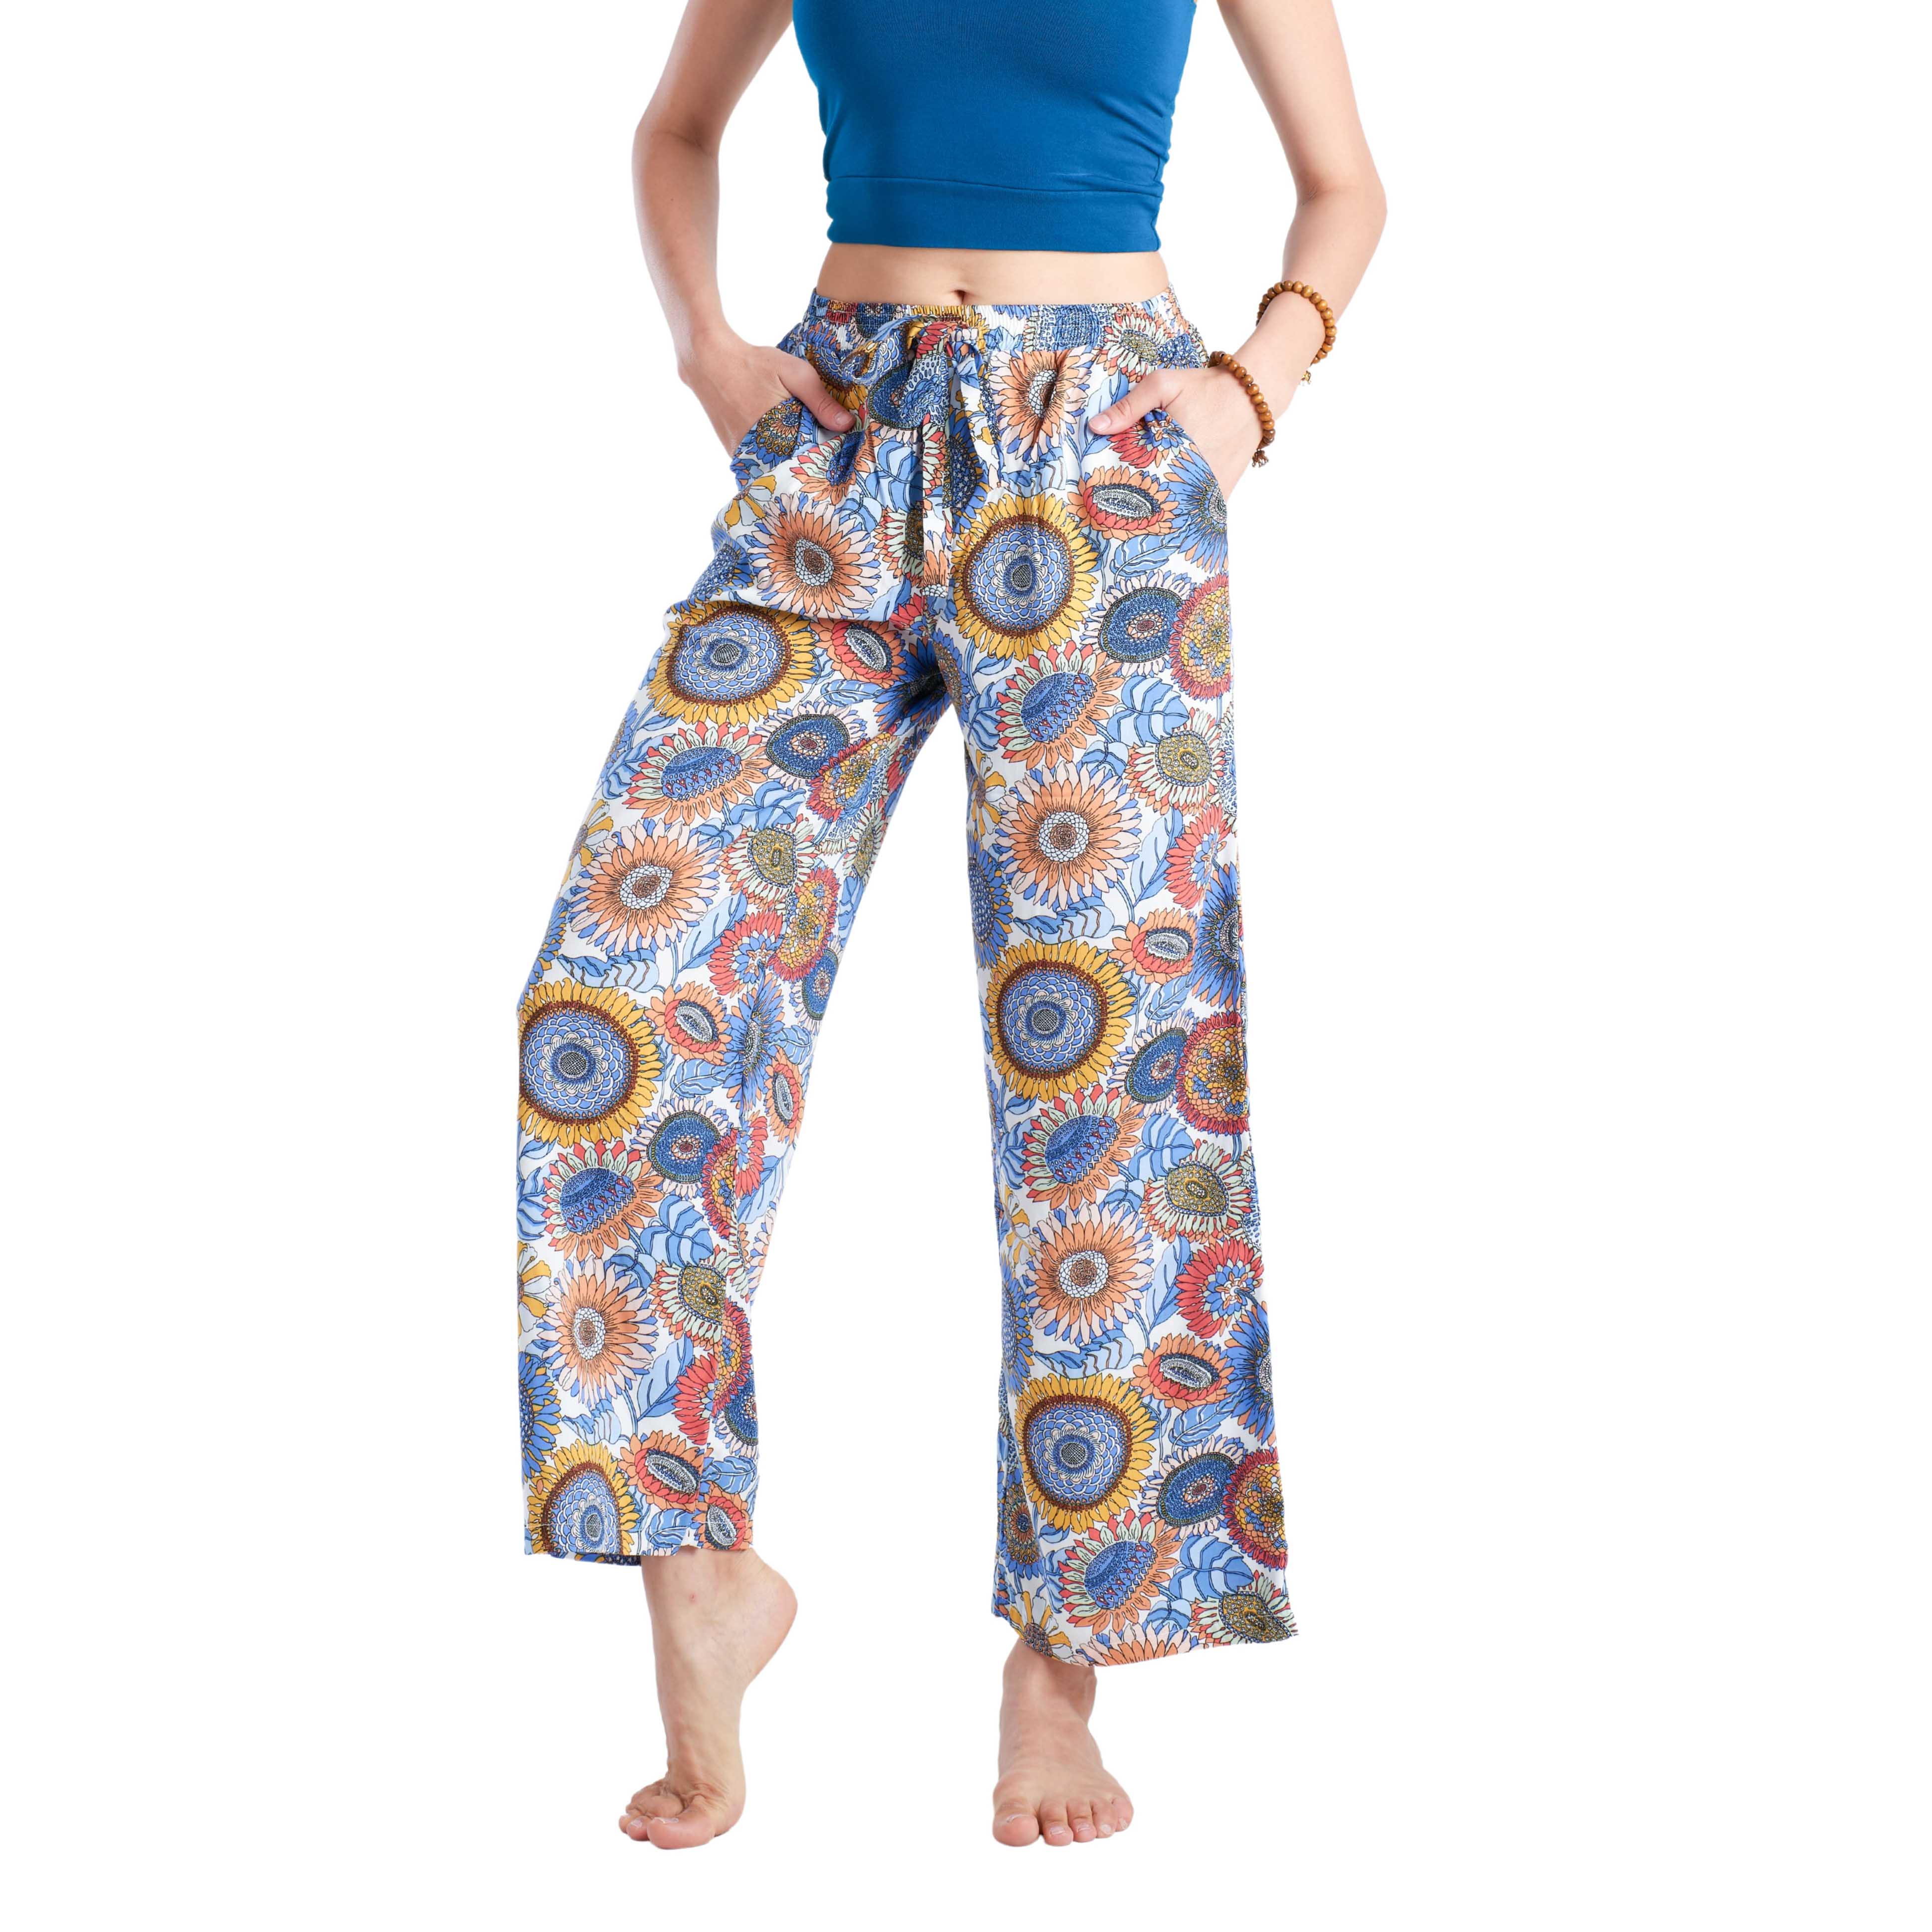 Elastic Waist - Buy Today Elephant Pants Jewelry And Bohemian Clothes Handmade In Thailand Help To Save The Elephants FairTrade And Vegan